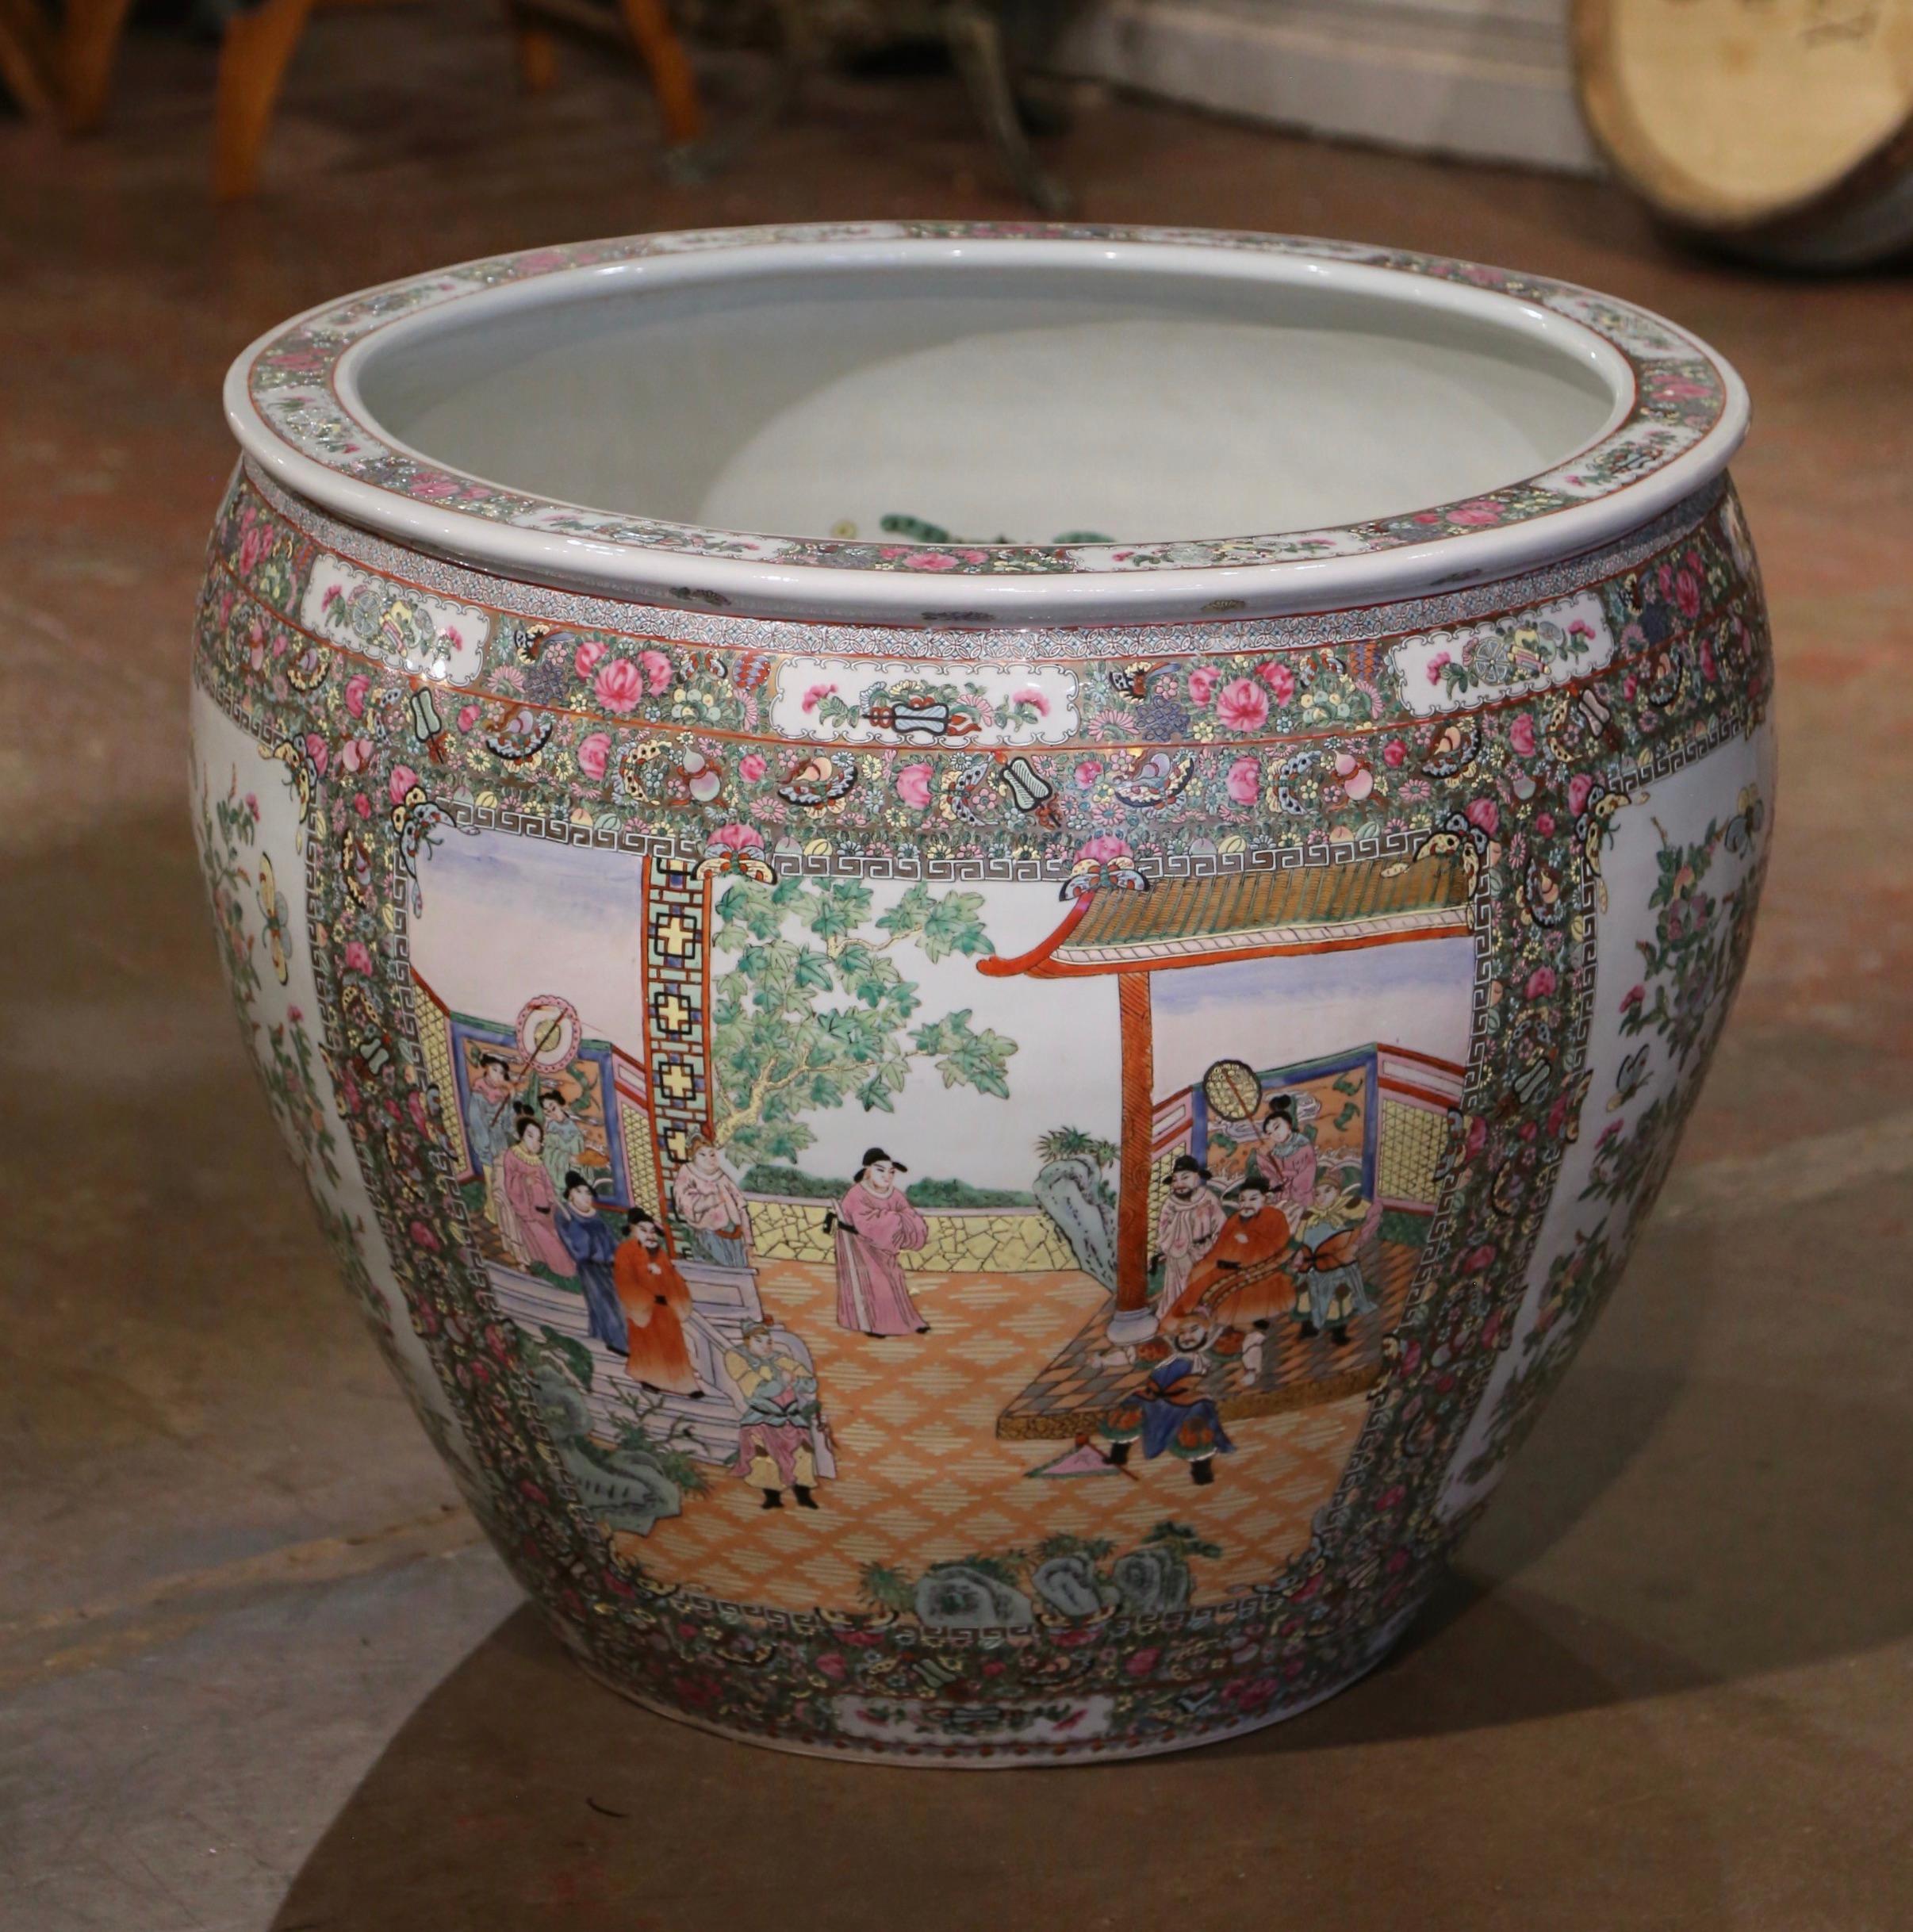 This massive and colorful vintage fishbowl was created in China, circa 1970. Round in shape, this elegant exotic porcelain planter features two large hand painted medallions with Chinese figural motifs and embellished with floral and leaf decor